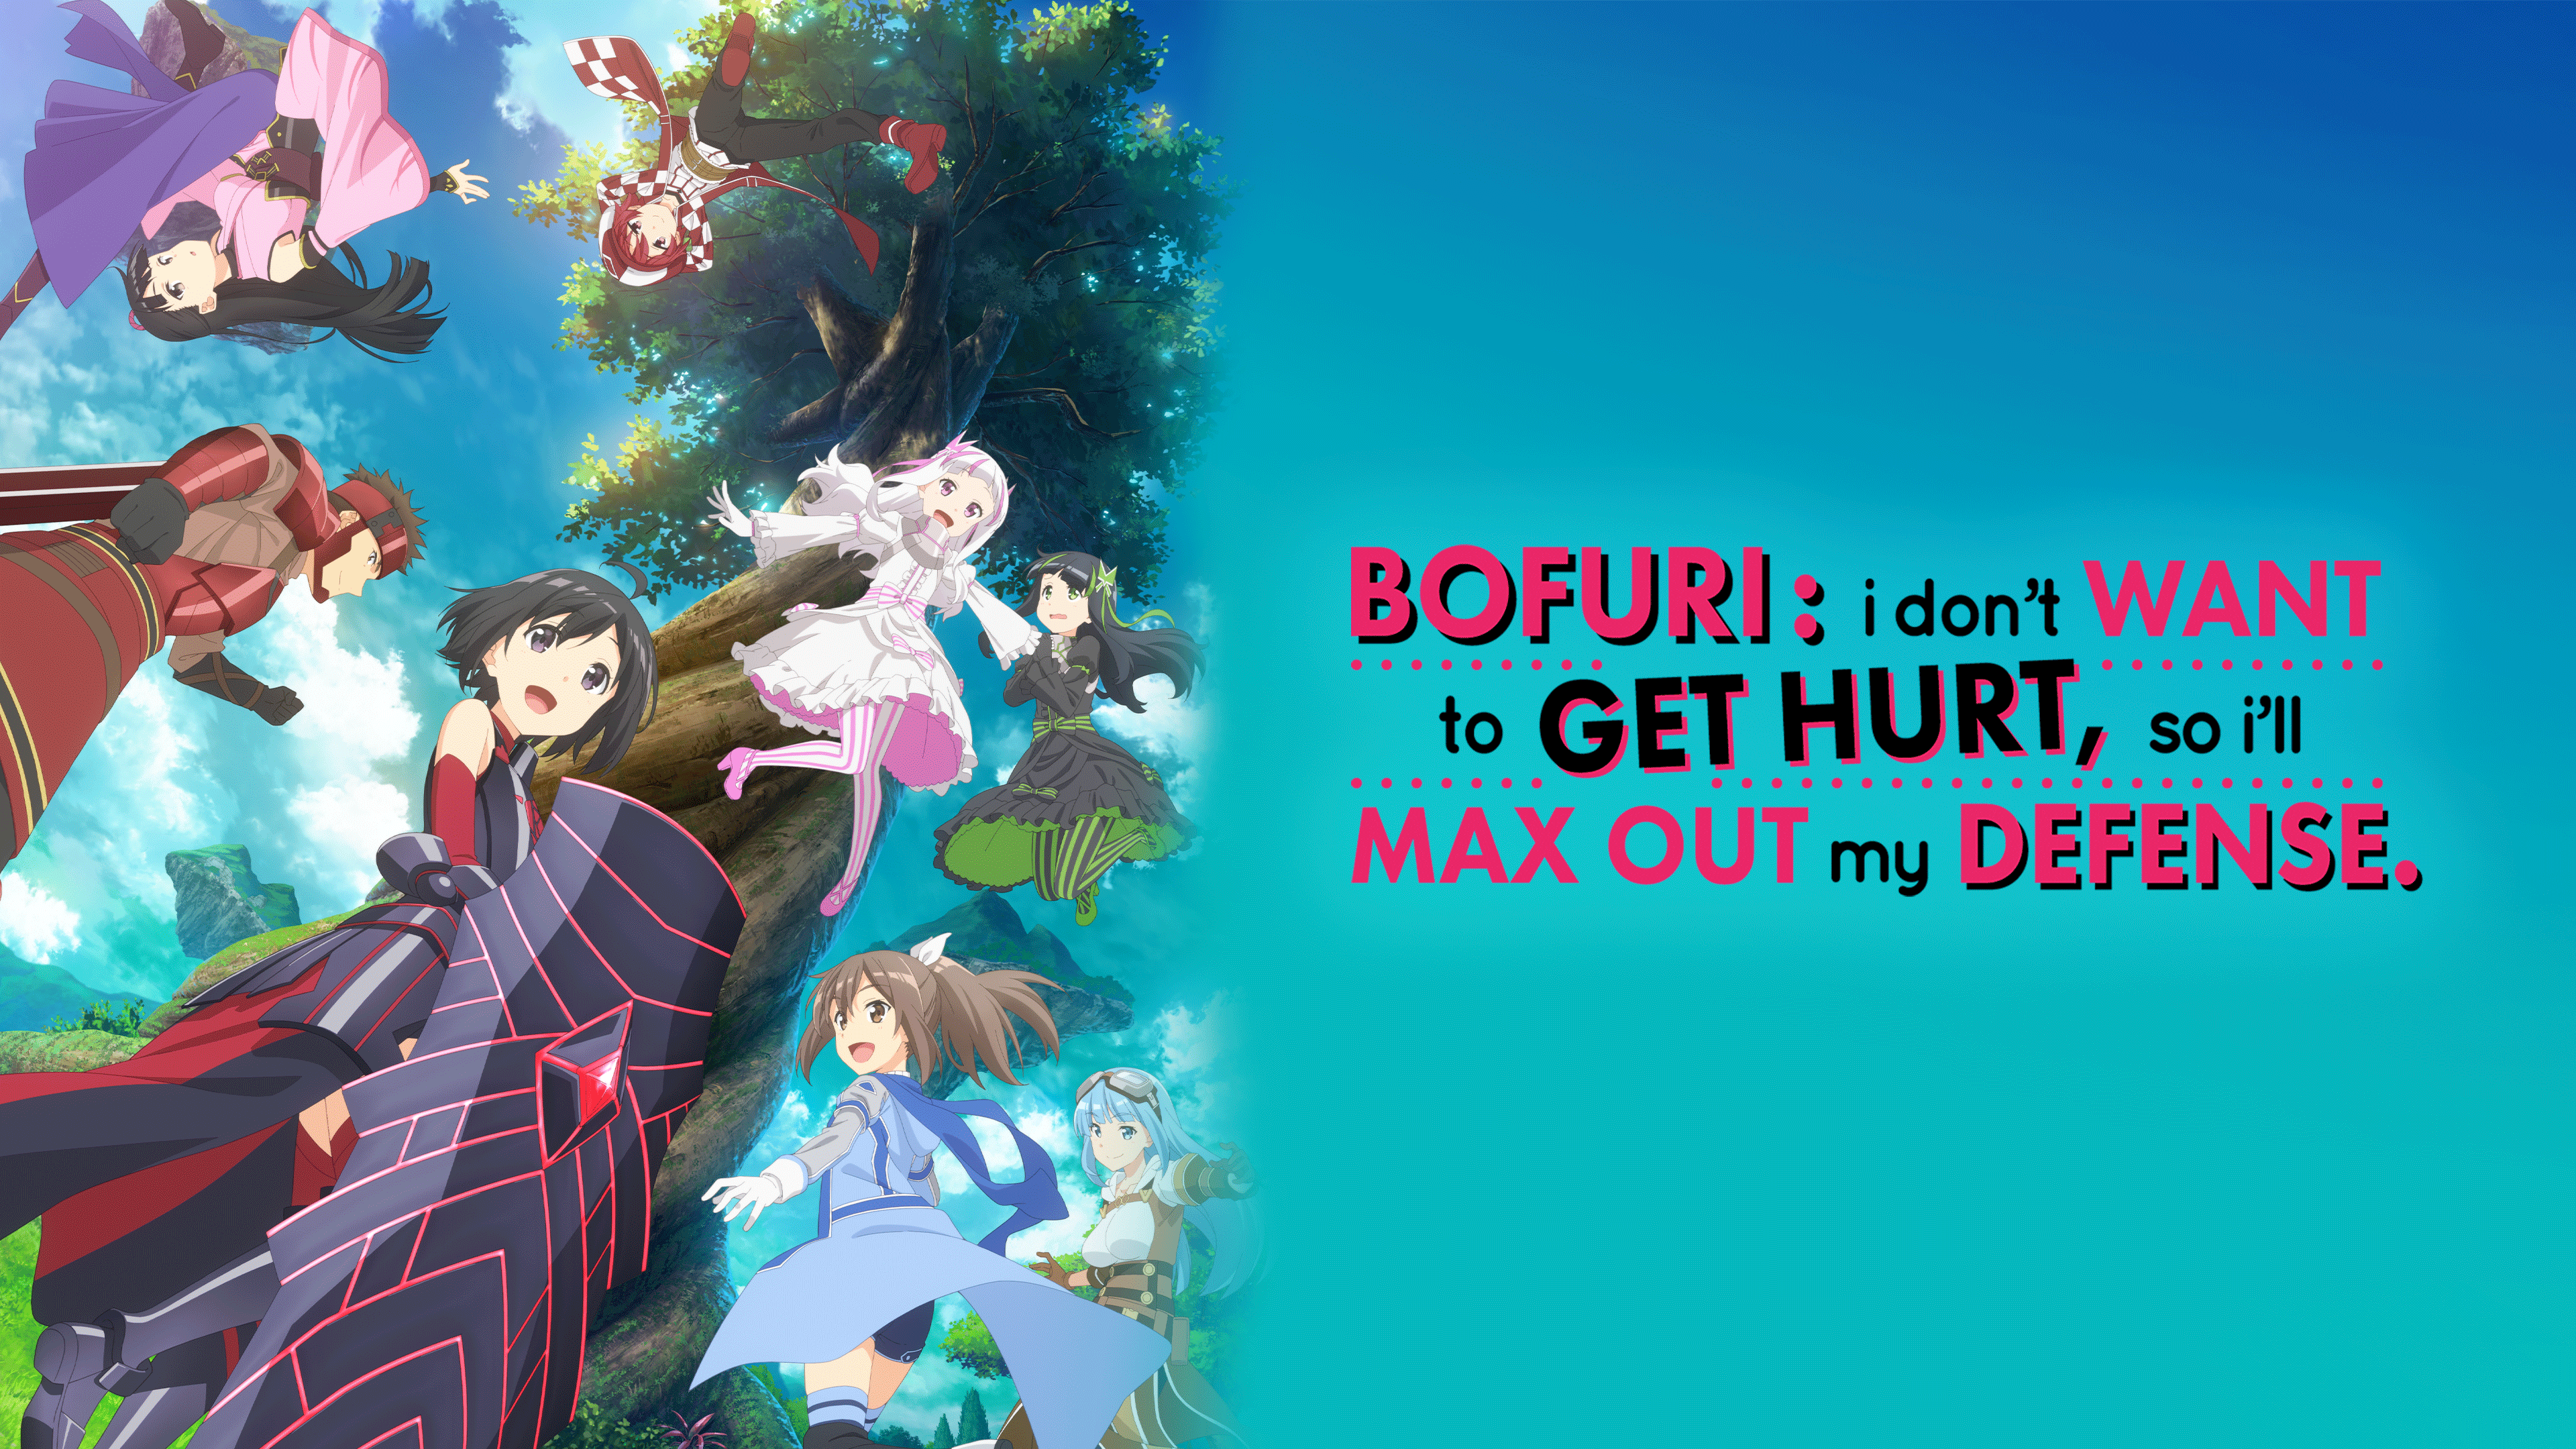 Watch Bofuri: I Don'T Want To Get Hurt, So I'Ll Max Out My Defense. Sub & Dub | Action/Adventure, Comedy, Fantasy, Sci Fi Anime | Funimation